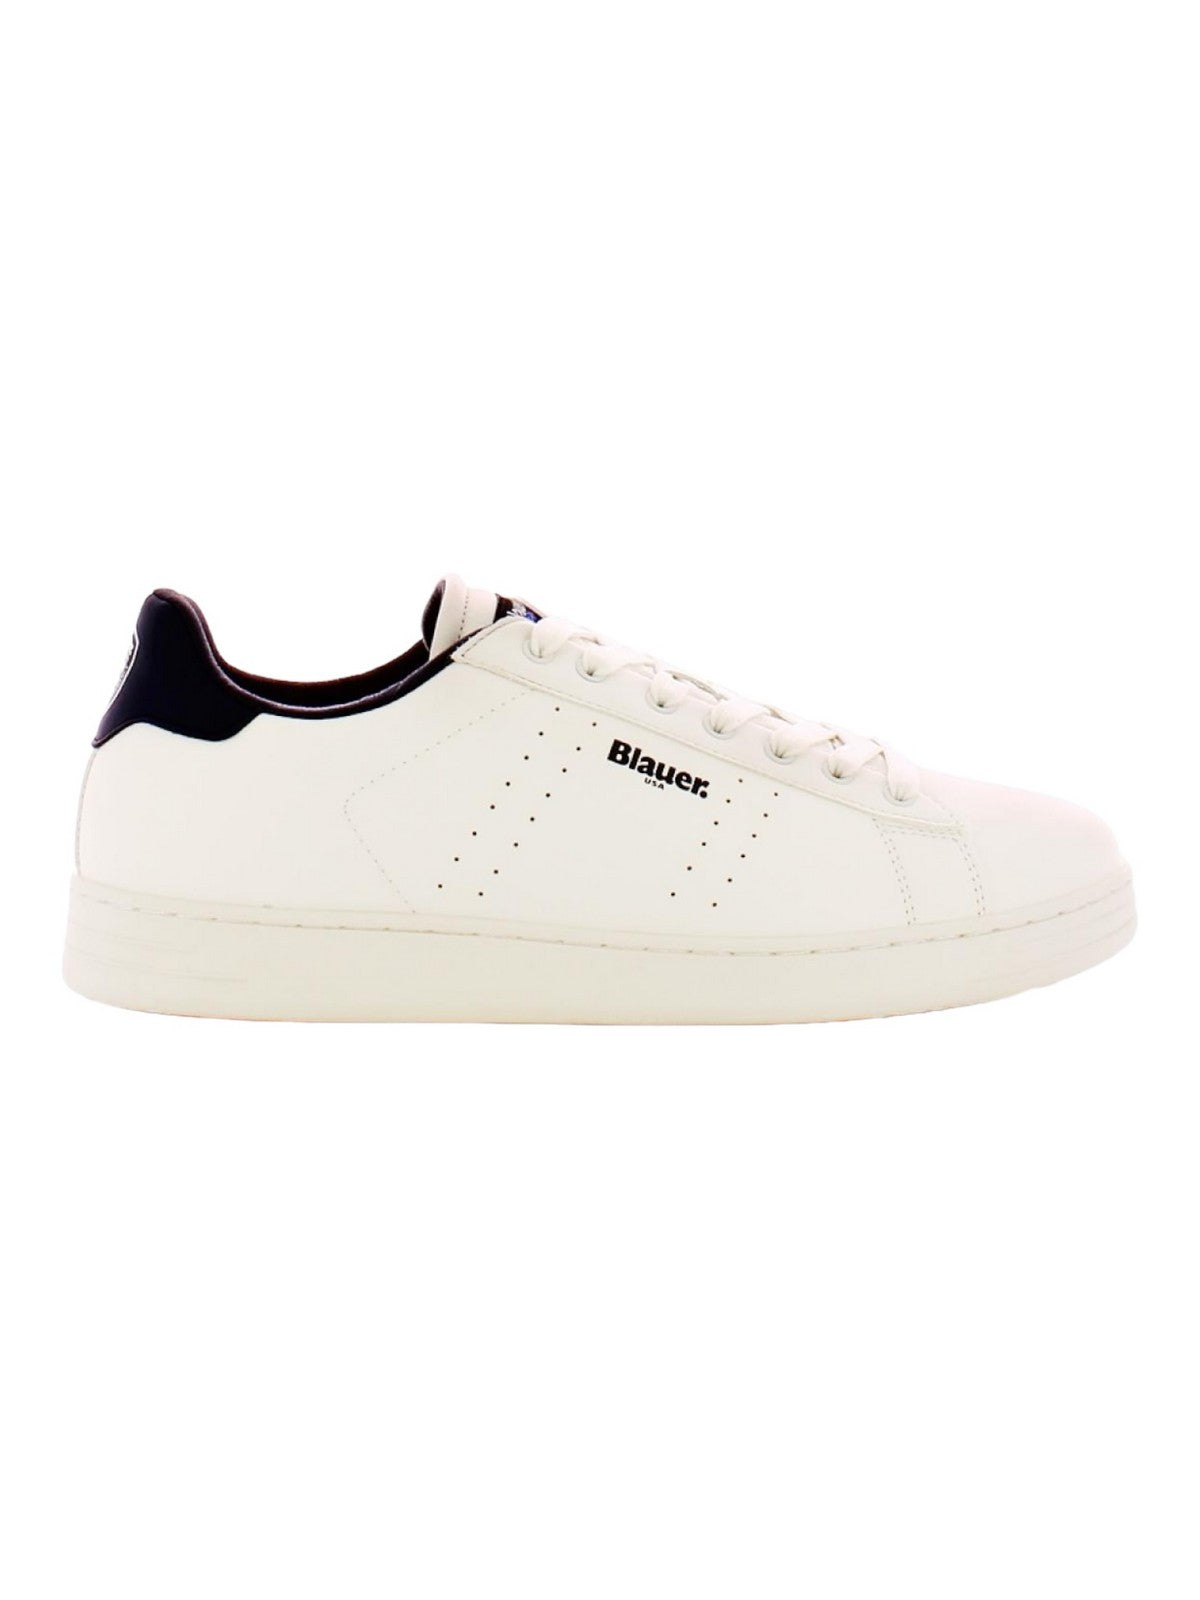 BLAUER Hommes Sneaker GRANT01 S4GRANT01/PUC WHI/NVY Blanc